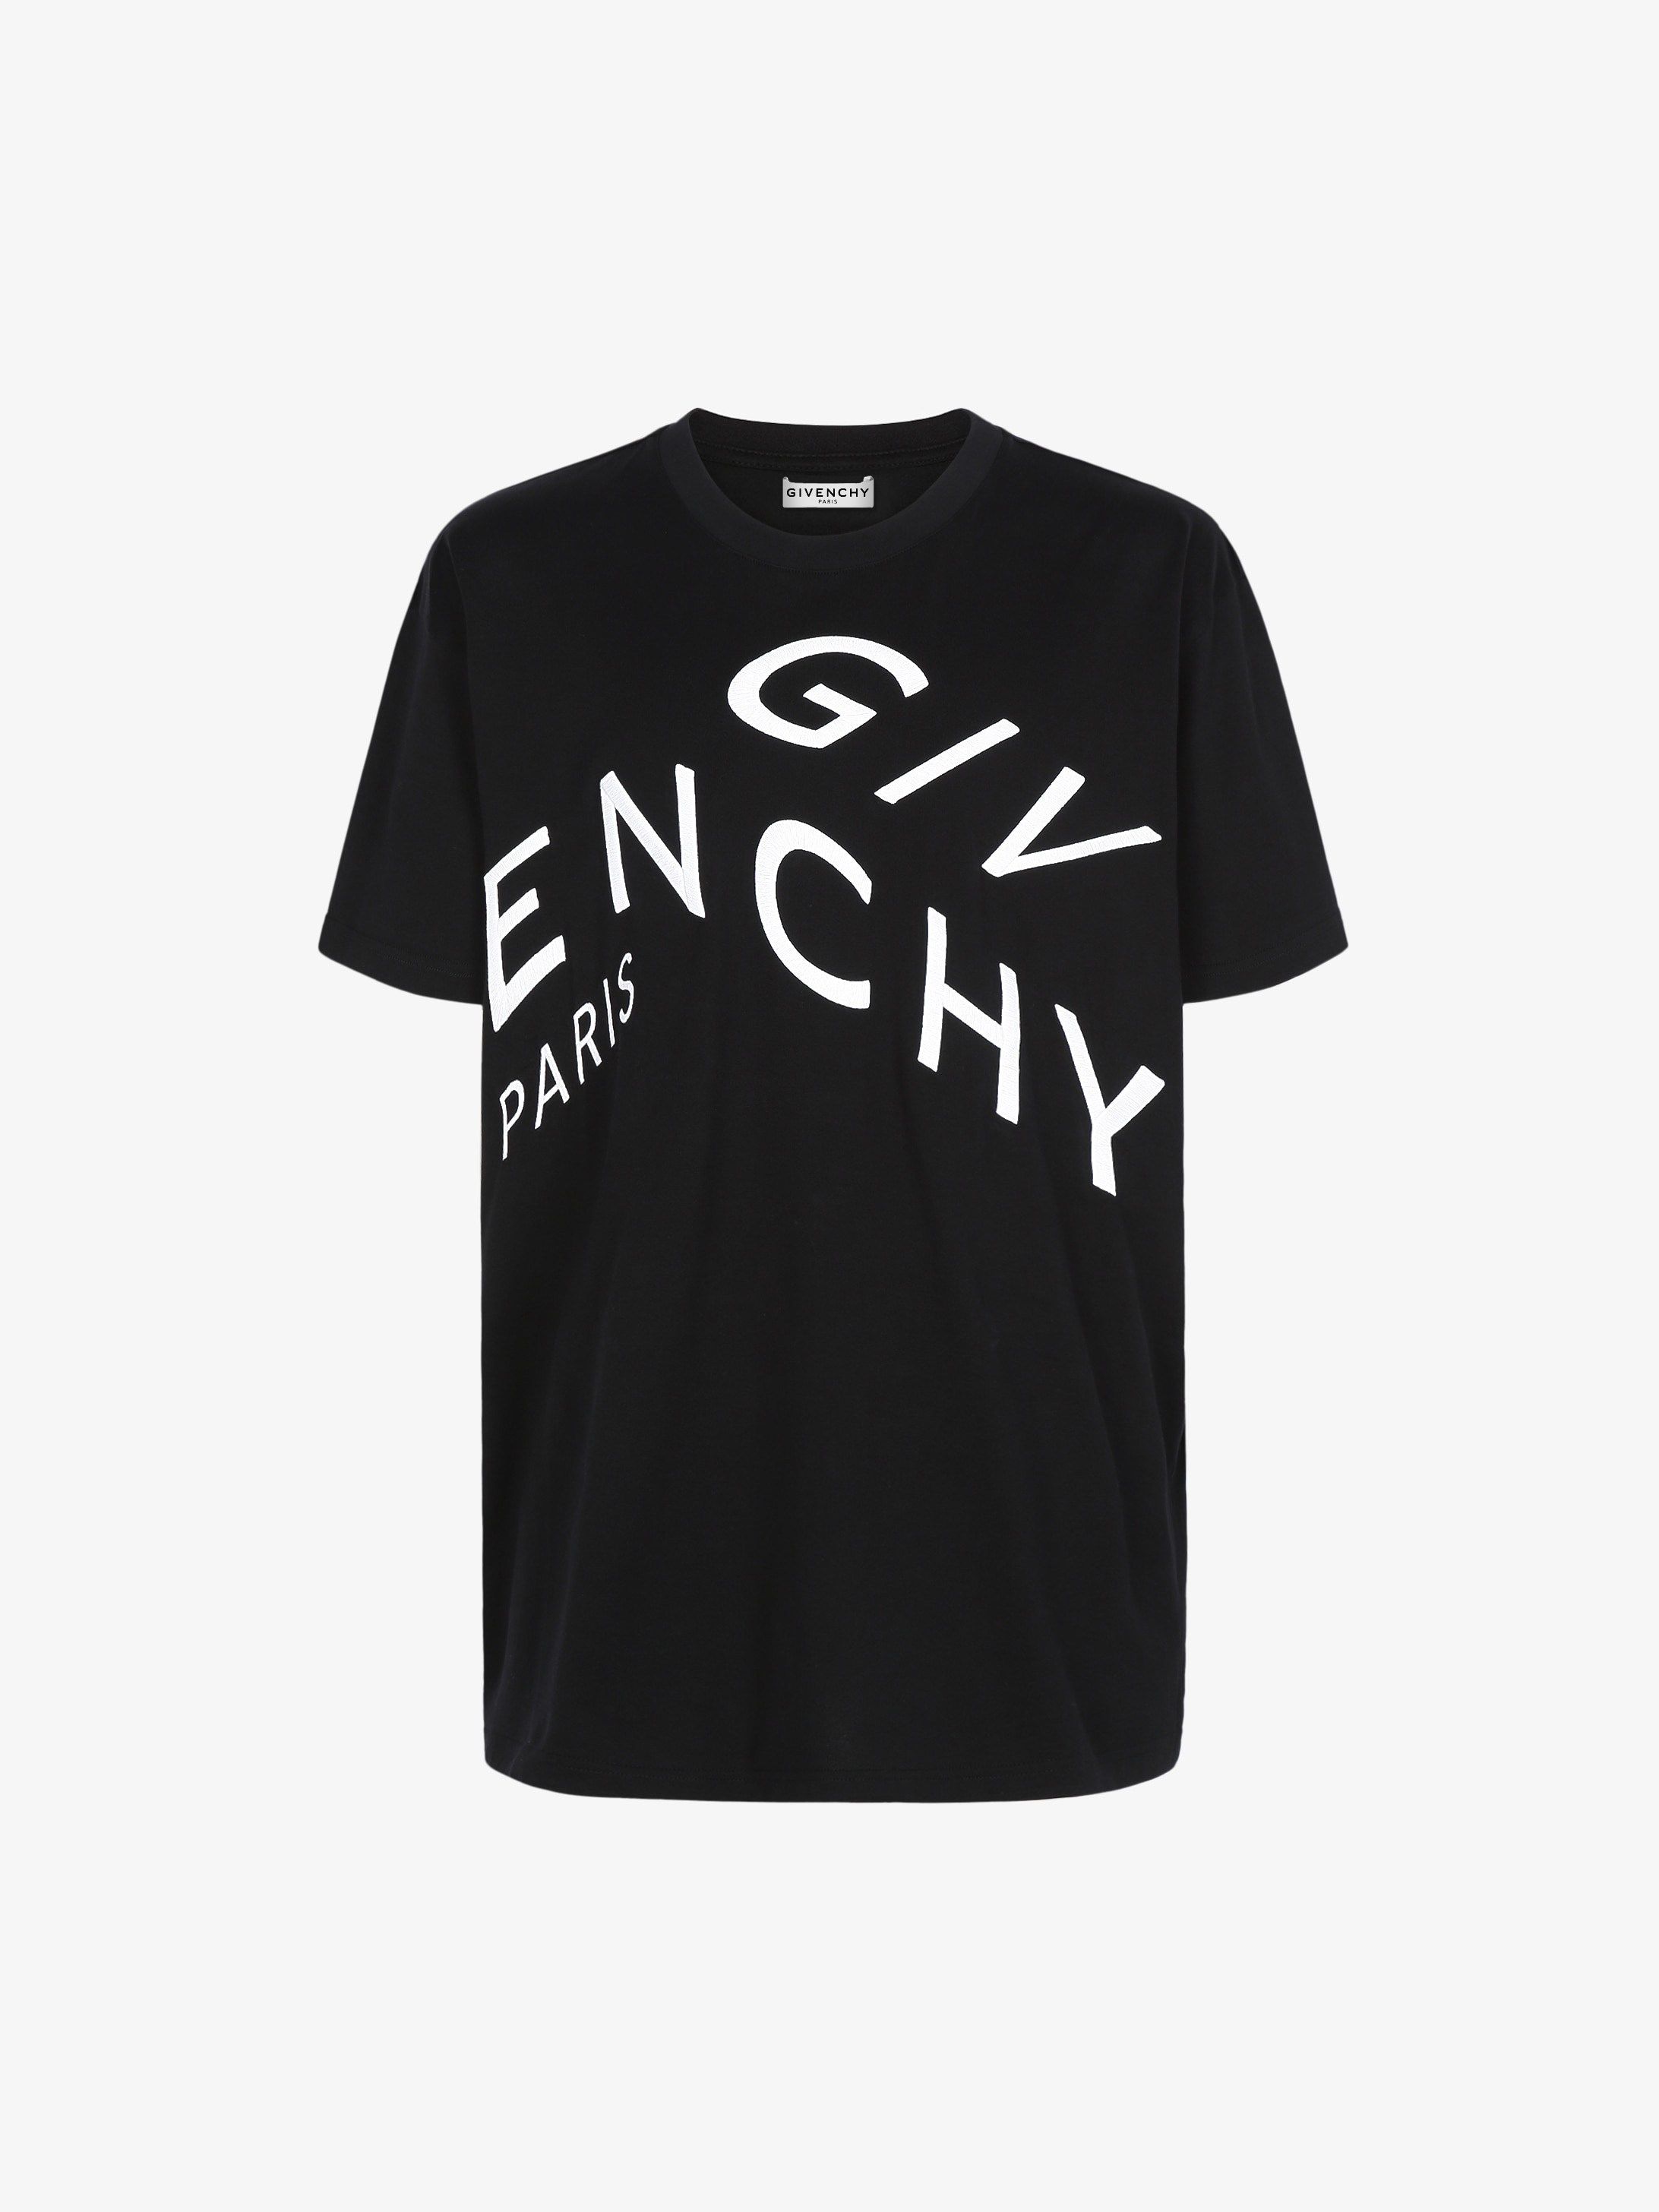 black and white givenchy t shirt